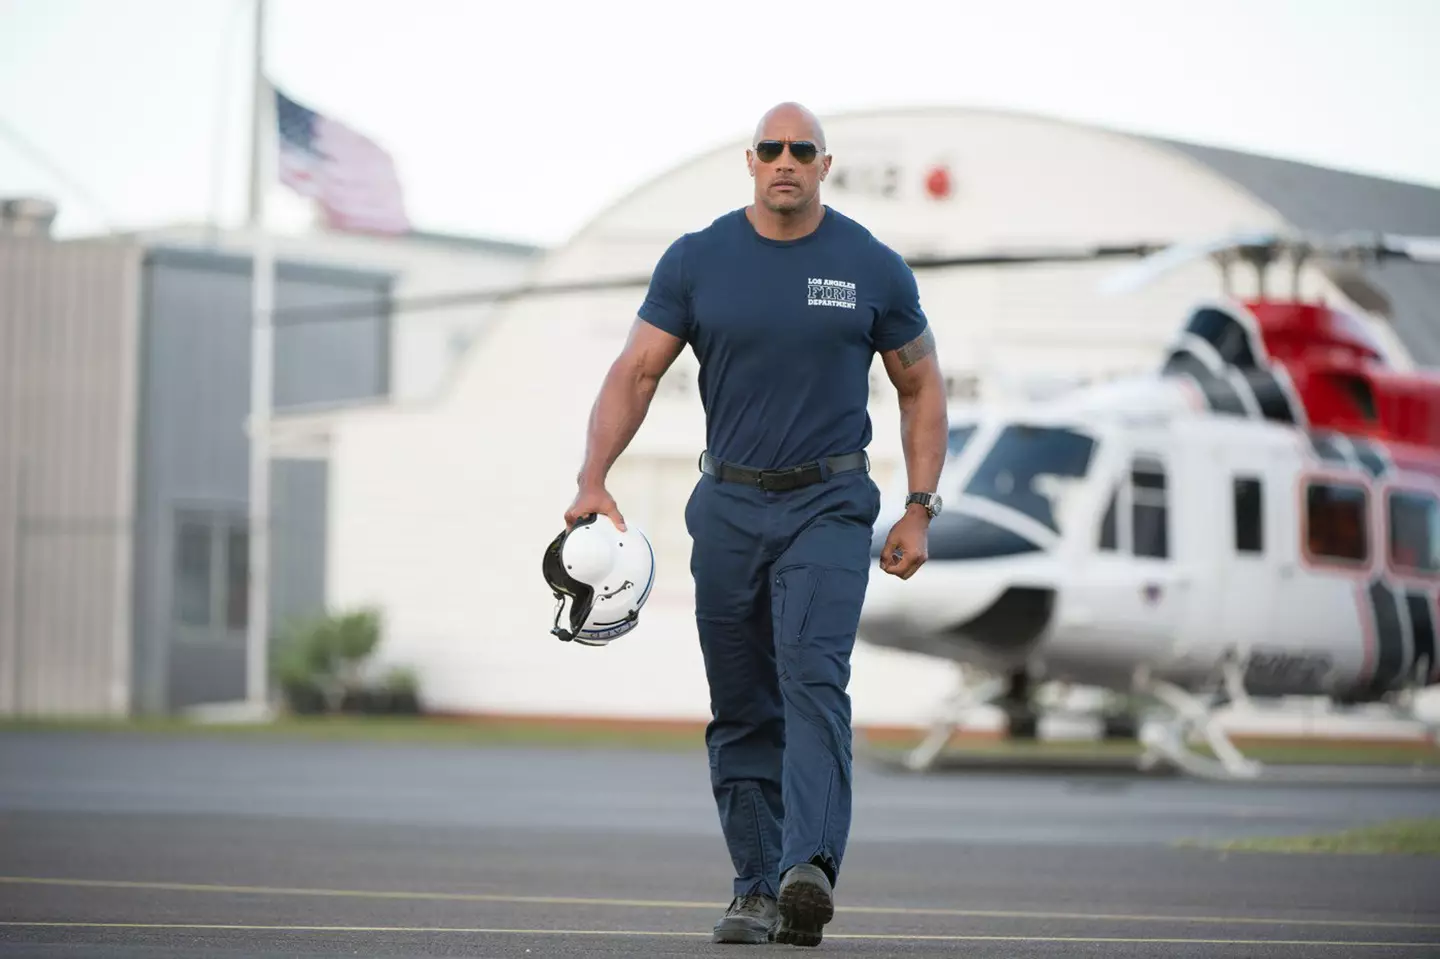 The Rock has previously hinted he may run a presidential campaign in the future.